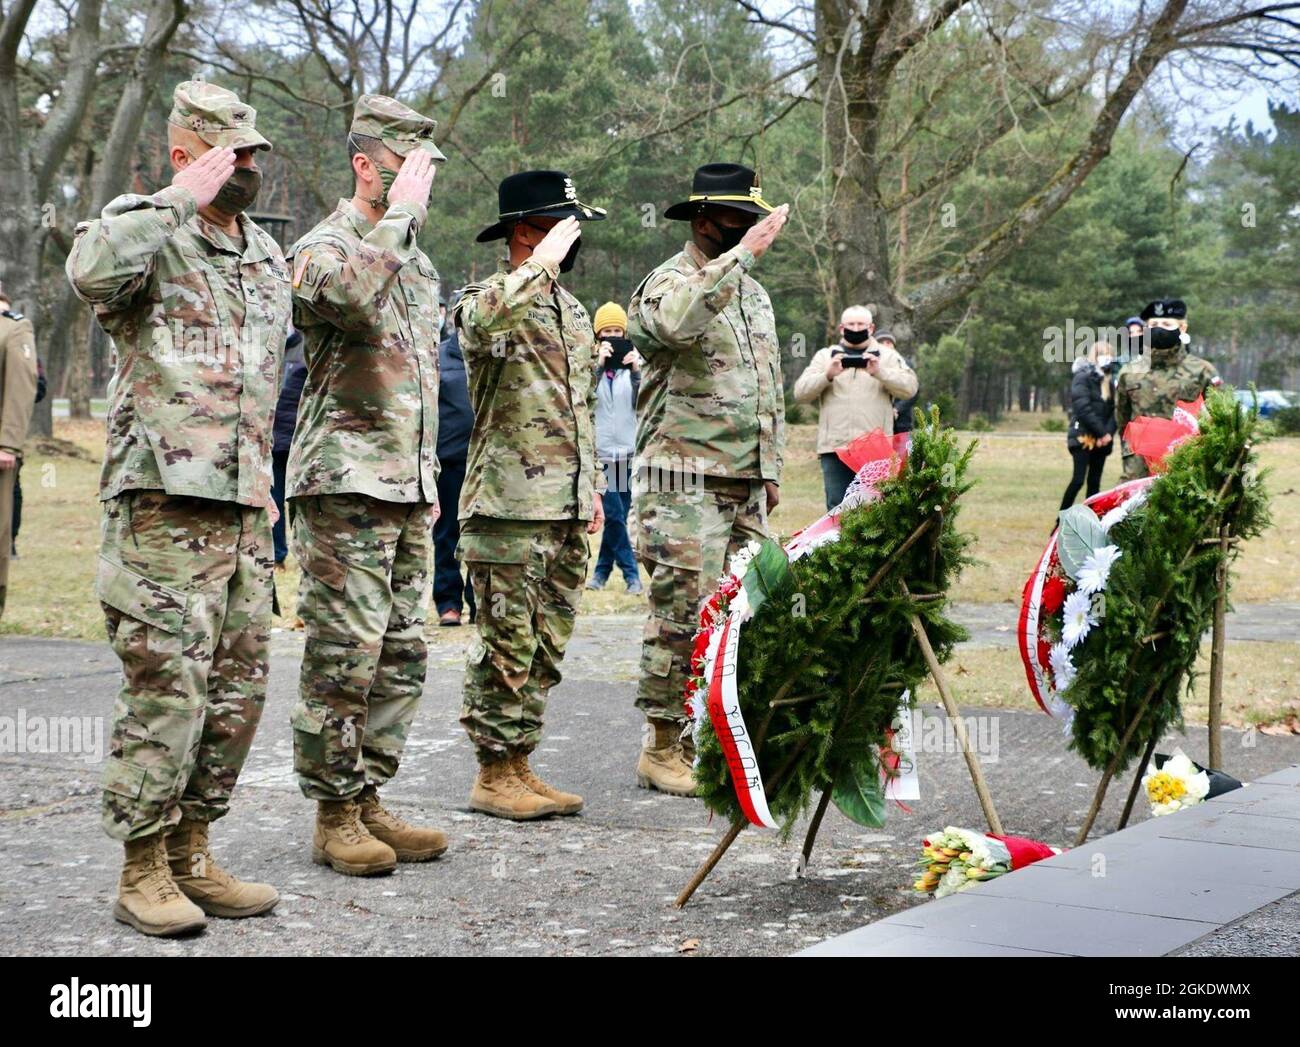 Command teams from two U.S. Army units salute at a remembrance ceremony in Zagan, Poland, on Mar. 24, 2021. Left to right (in camouflage uniforms): Army Col. Ricardo Roig, 50th Regional Support Group (RSG) commander, Command Sgt. Maj. Robert Sweat, 50th RSG command sergeant major, Army Col. Ryan Hanson, 1st Armored Brigade, 1st Cavalry Division (1ABCT 1CD) commander, and Command Sgt. Maj. Calvin Hall, 1ABCT 1CD command sergeant major. The ceremony commemorates the efforts of Allied service members who participated in the “Great Escape” from Stalag Luft III, a German prison-of-war camp, in Marc Stock Photo